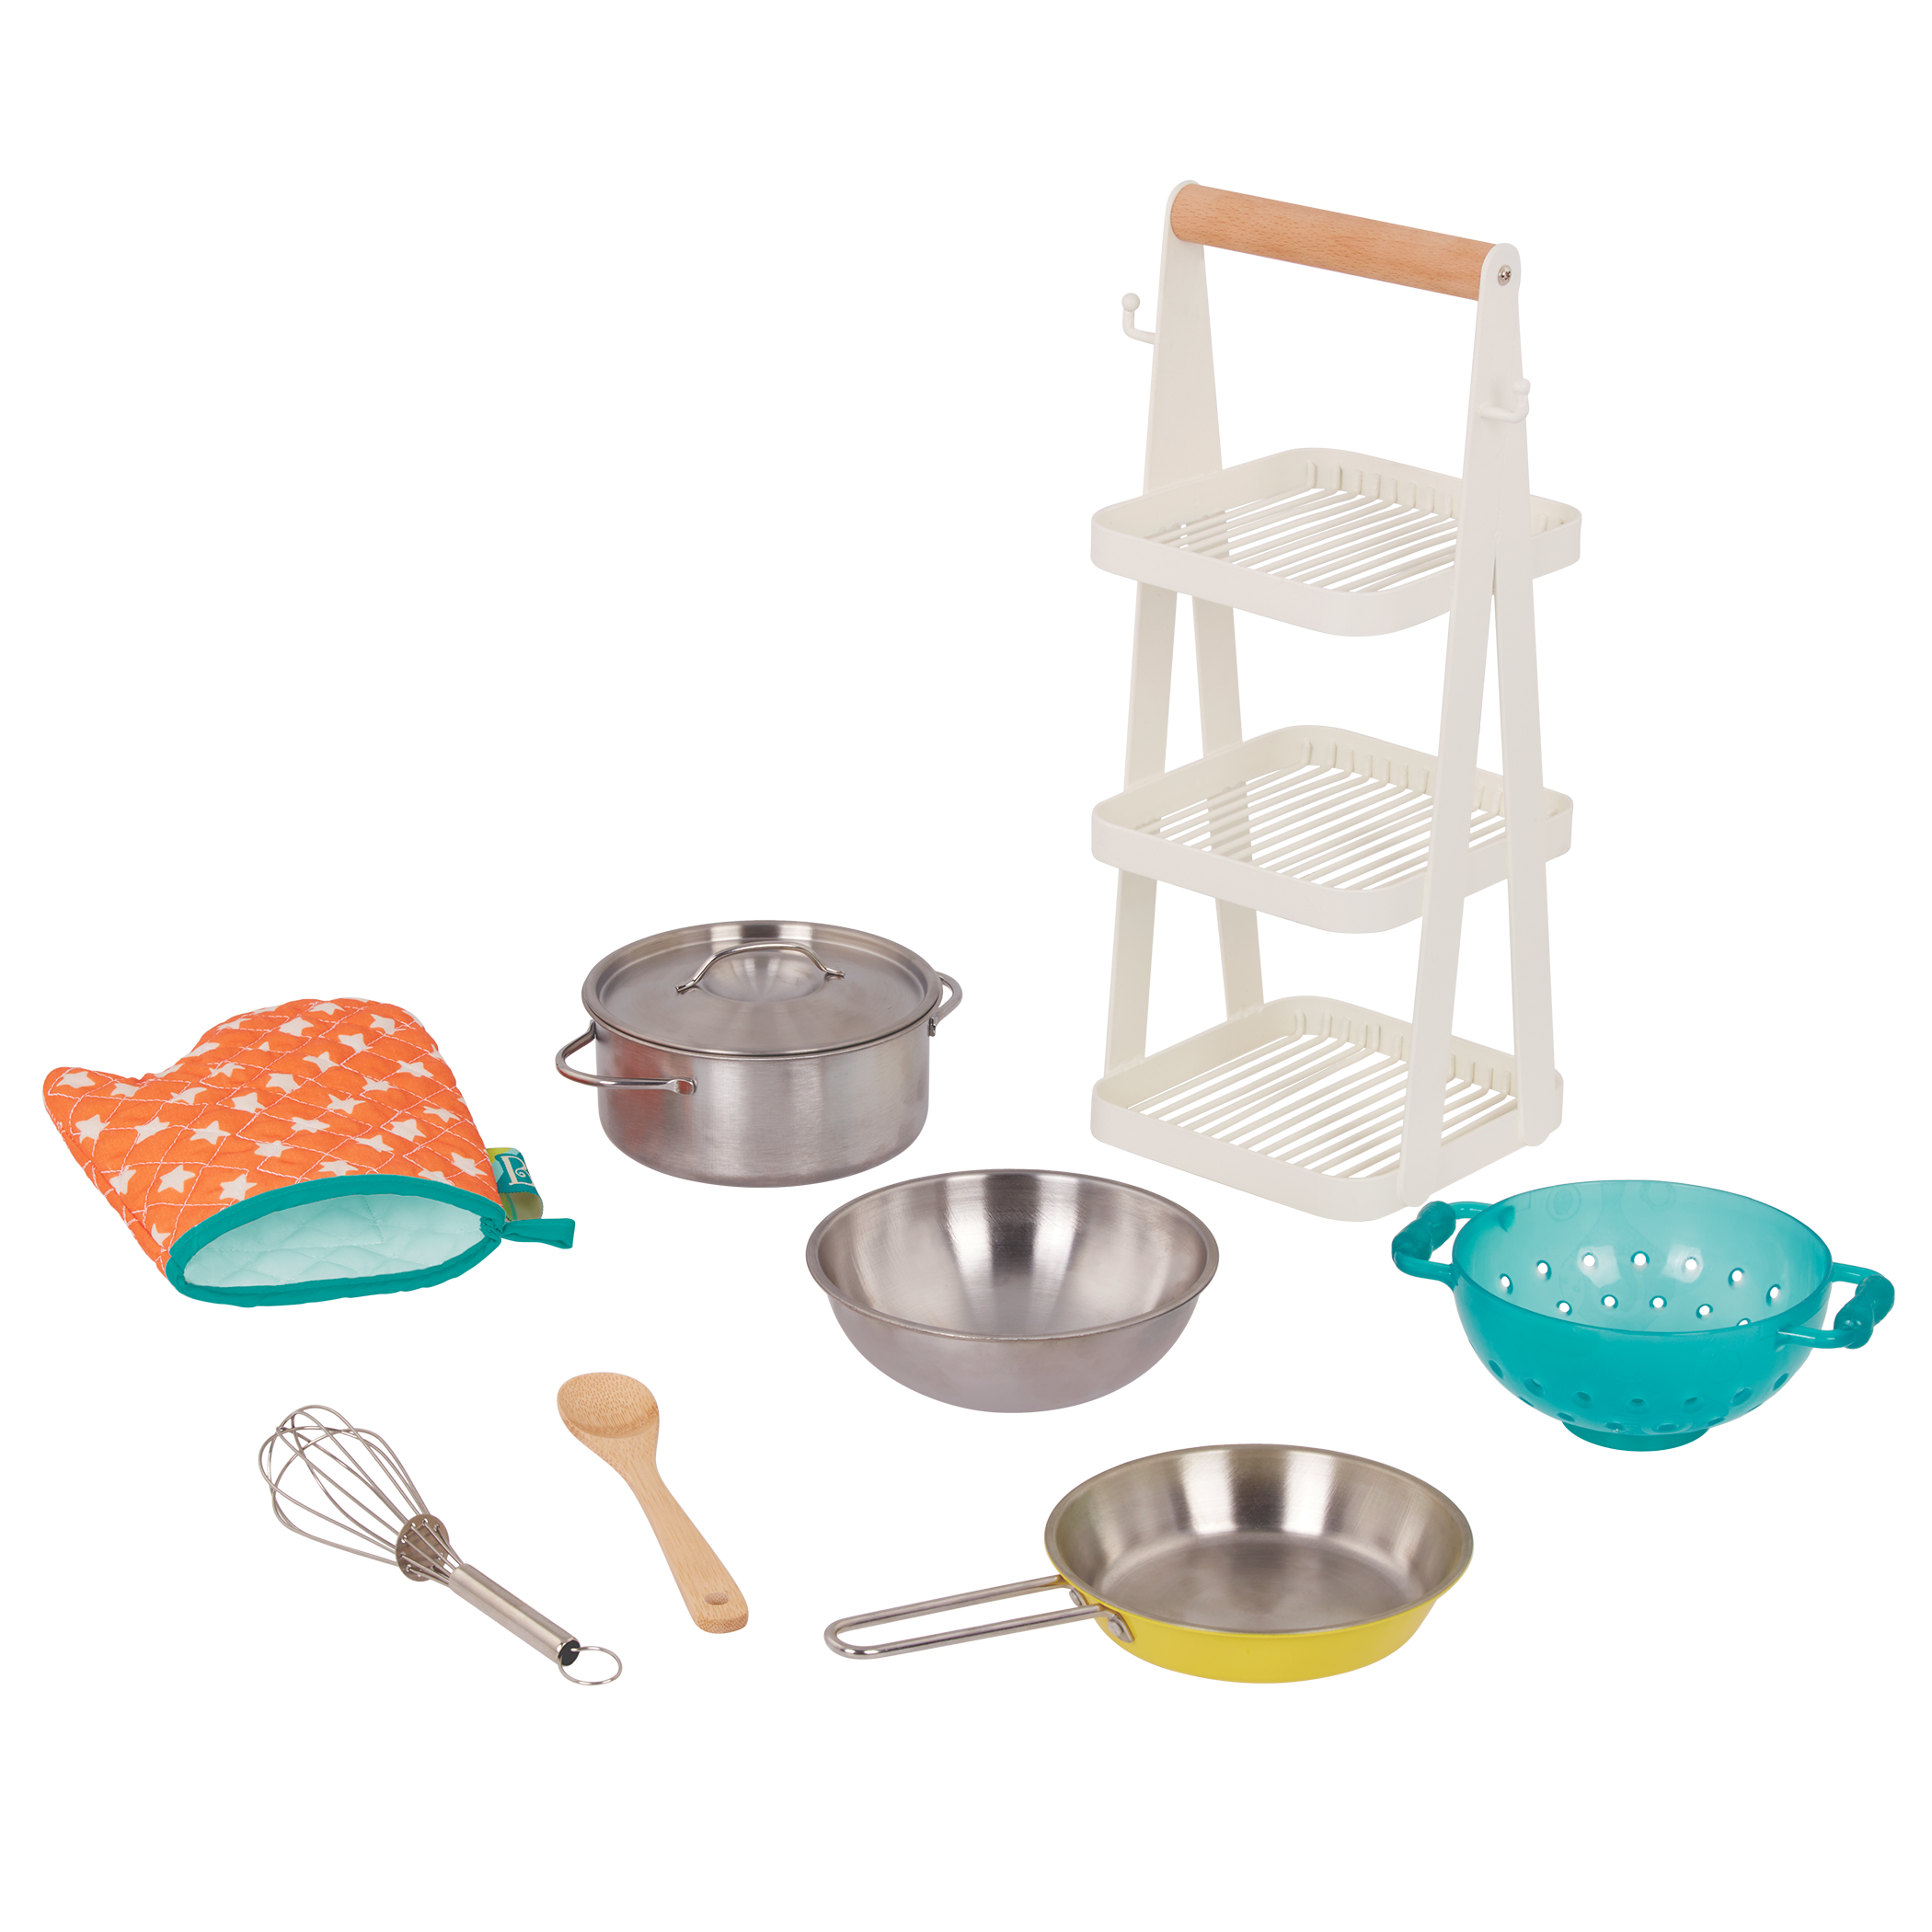 N /C 13 Pieces Mini Breakfast Stove Top Kitchen Appliances Playset,Cooking Pots Pans Food Dishes Pretend Play House Toys for Toddlers and Kids